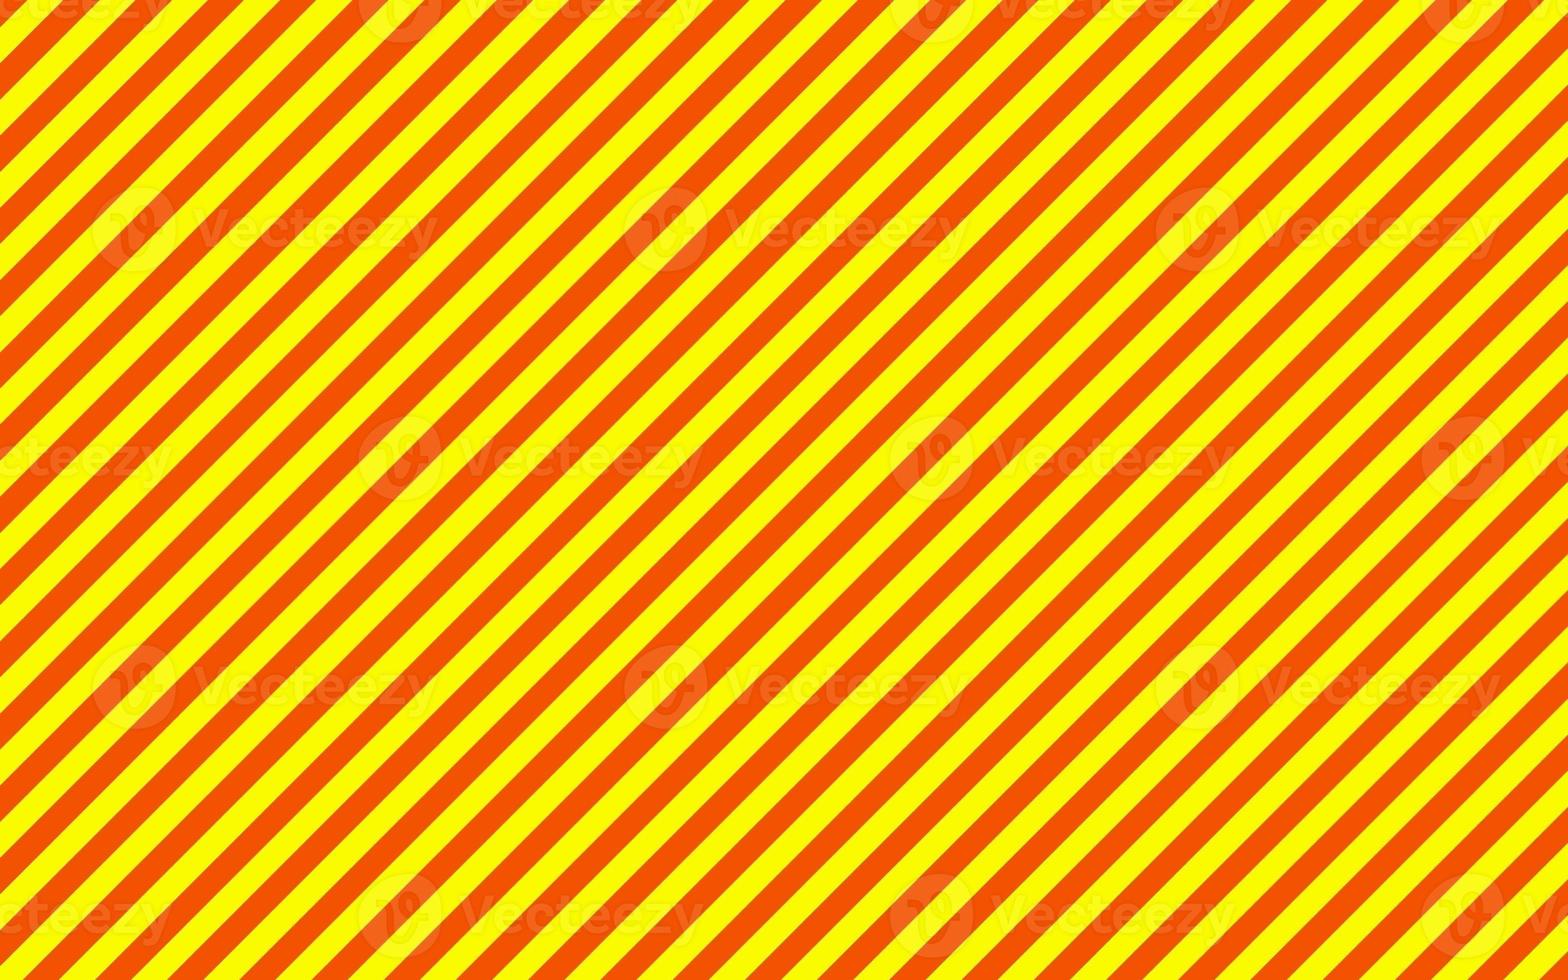 Seamless diagonal yellow and orange pattern stripe background. Simple and soft diagonal striped background. Retro and vintage design concept. Suitable for leaflet, brochure, poster, backdrop, etc. photo